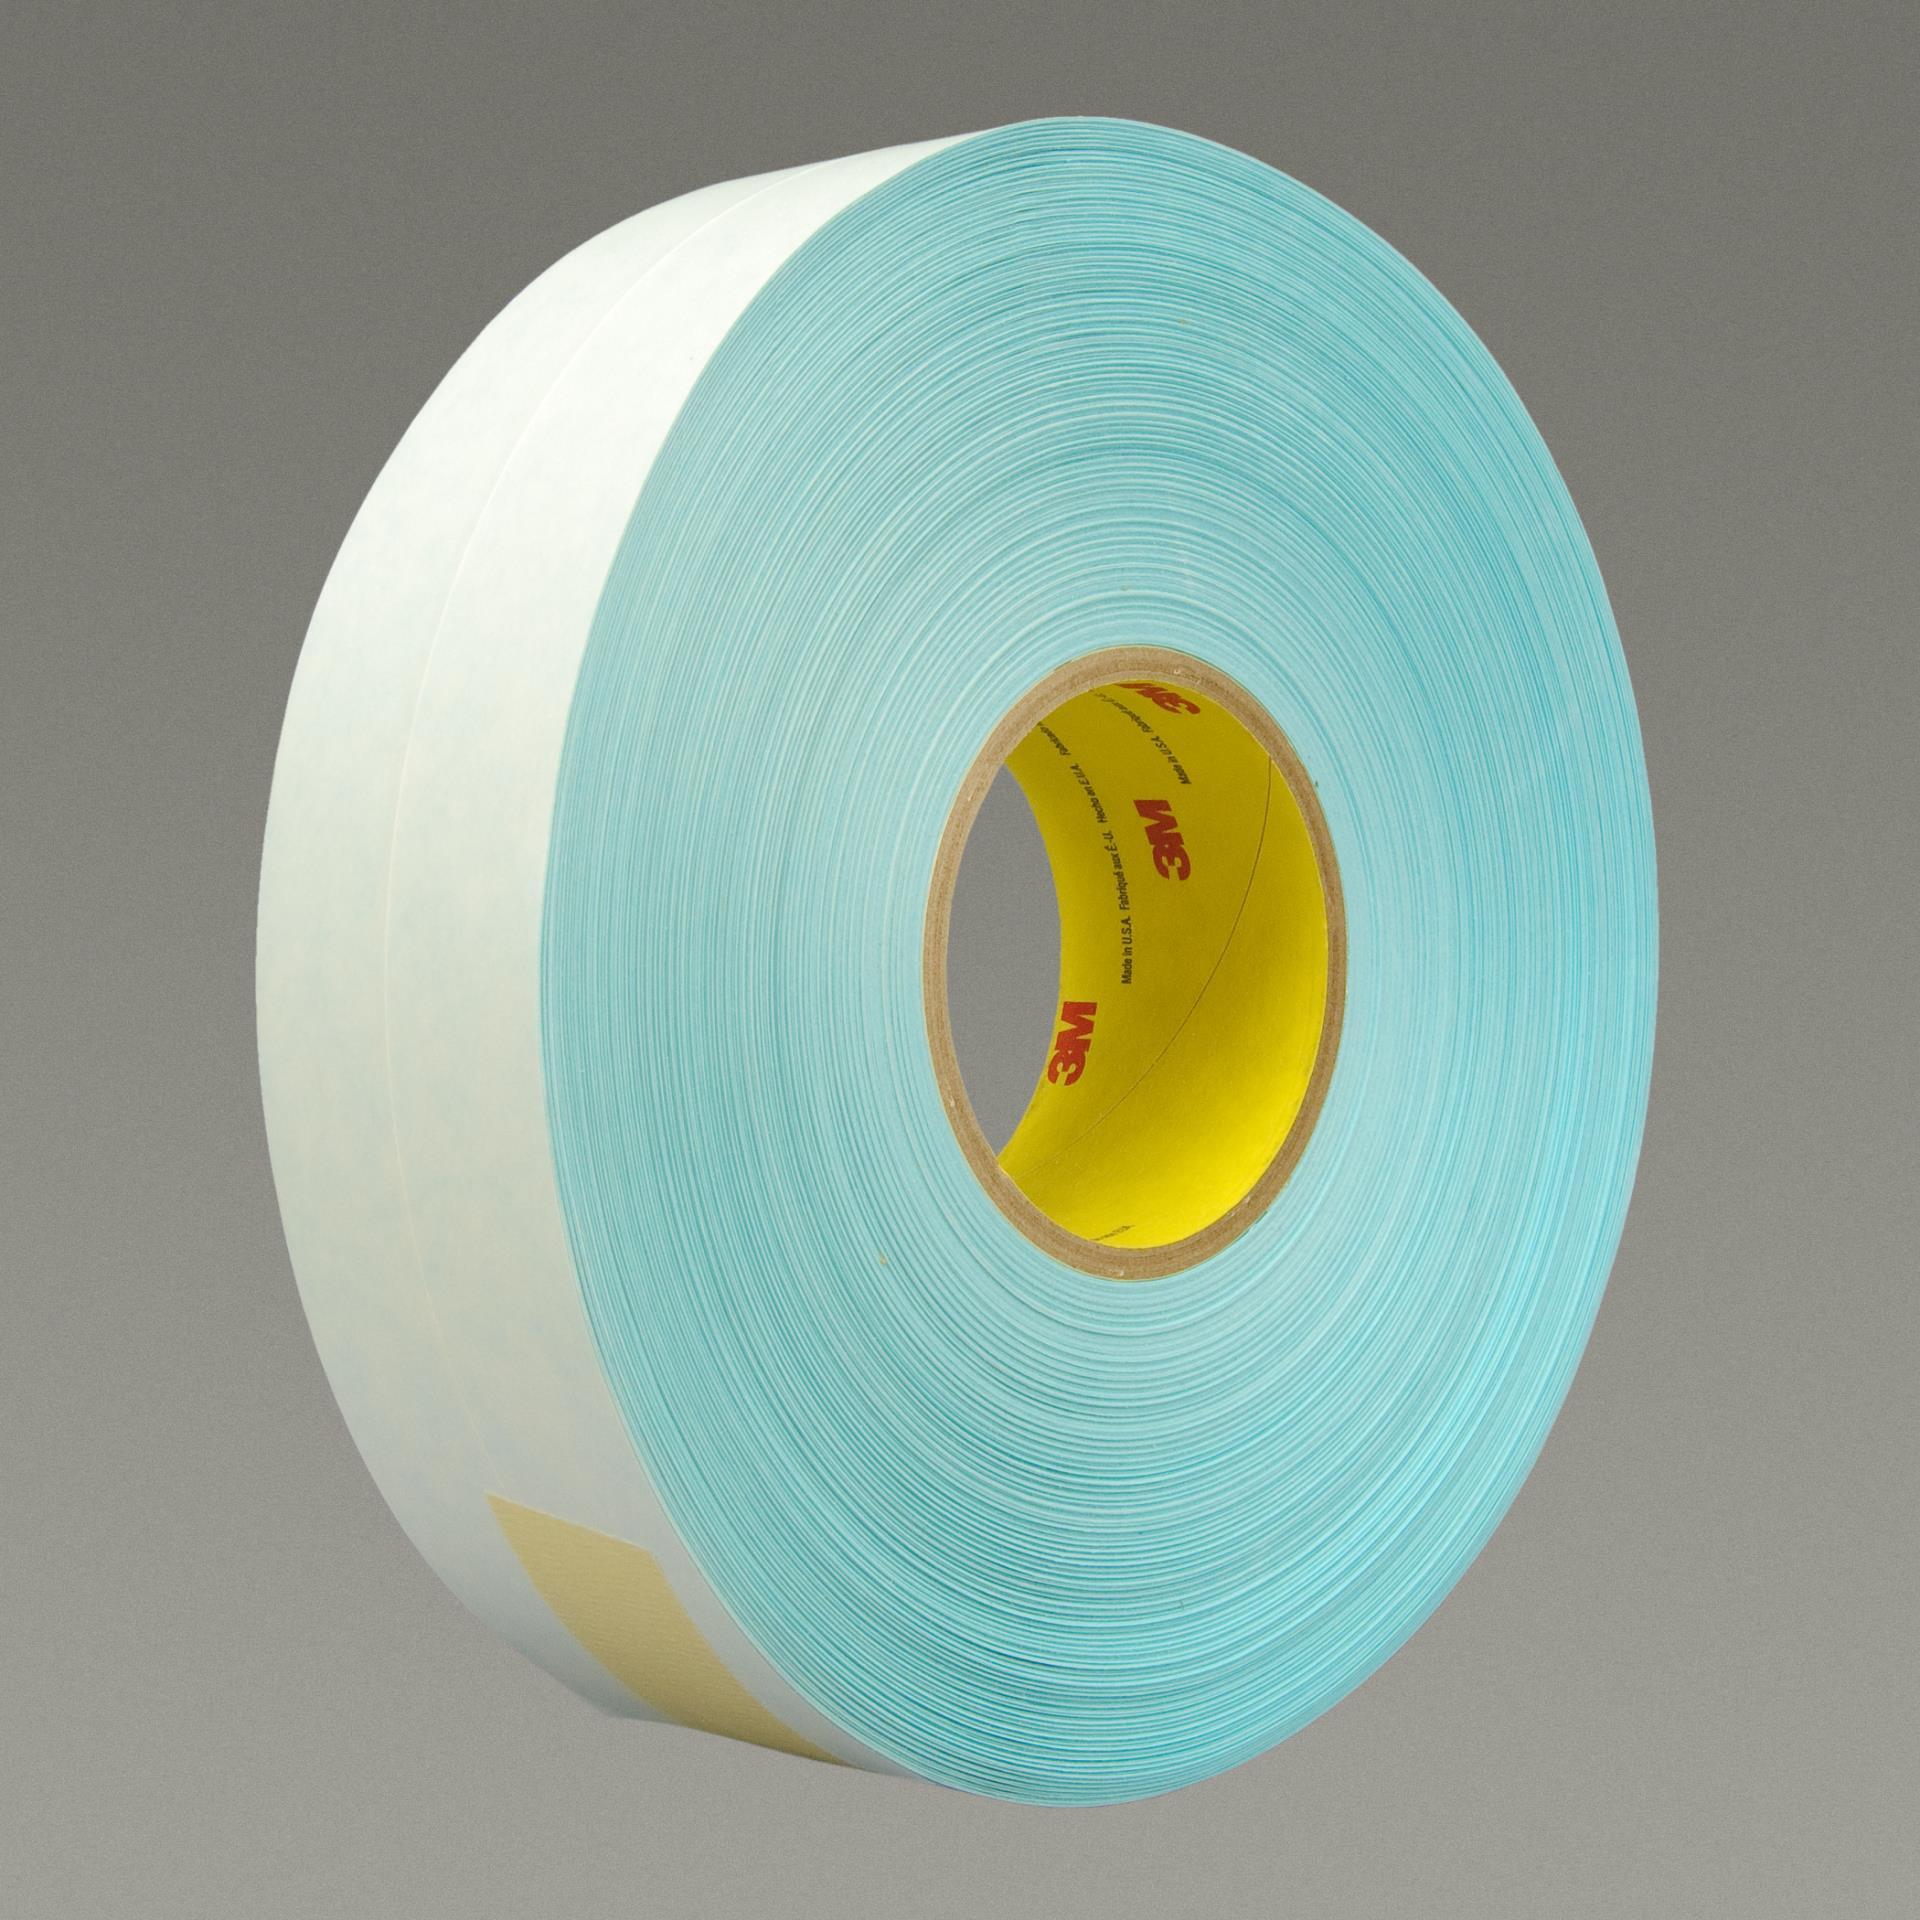 Pack of 100 Pack of 100 3M 8902 CIRCLE-4.000-100 400 degrees F 4.000 width 3M 8902 CIRCLE-4.000-100 Blue Polyester/Silicone Adhesive Tape Circles 4.000 length 4.000 width 4.000 length 